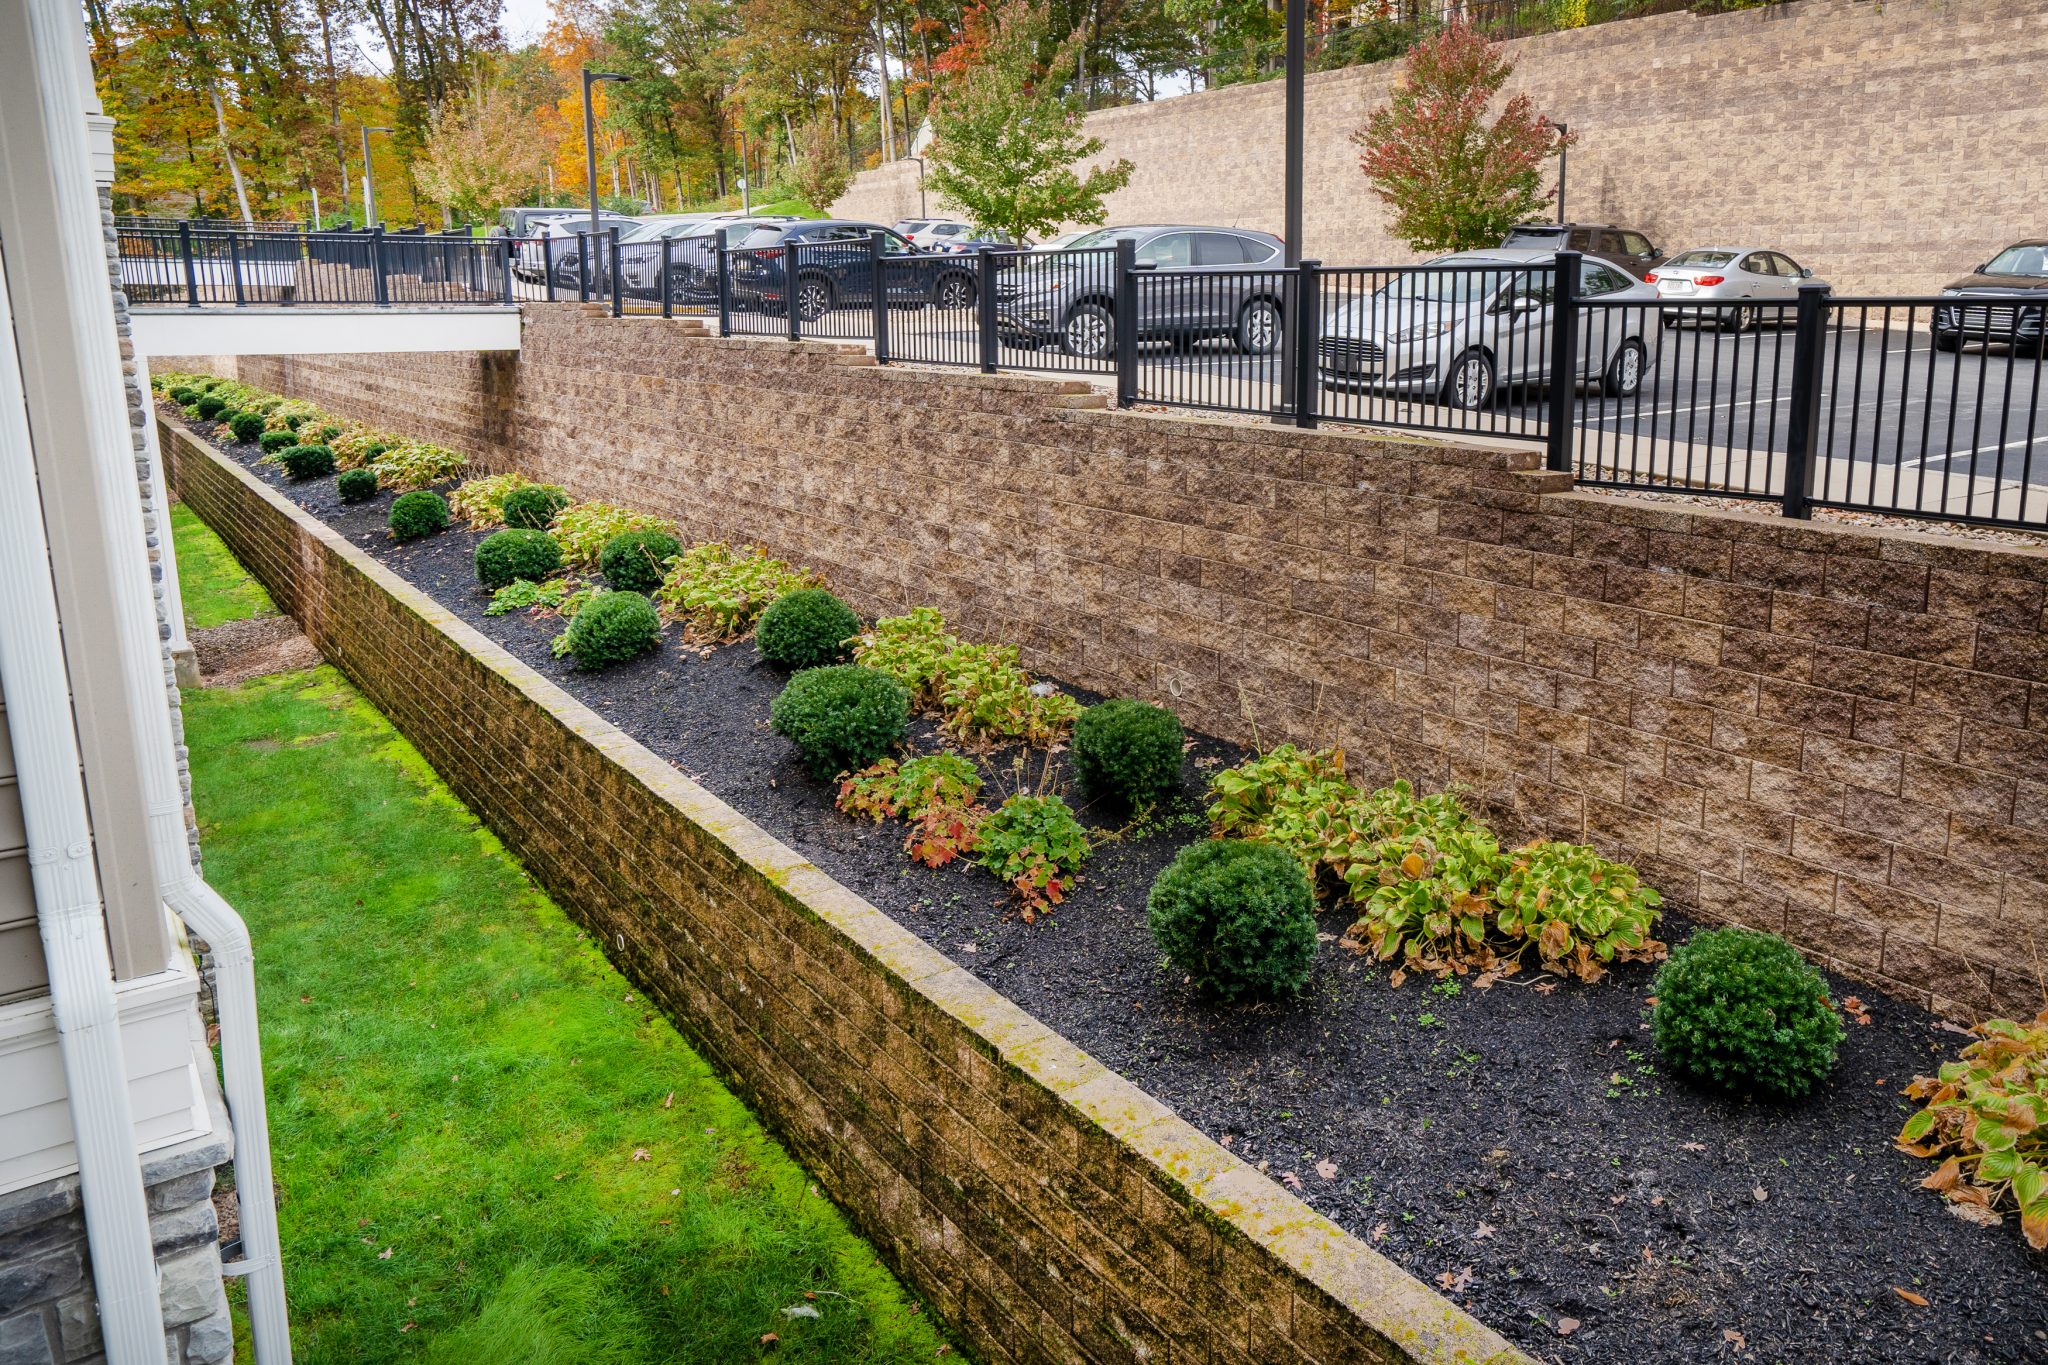 CornerStone 100 Apartment Planter Wall with Parking Lot